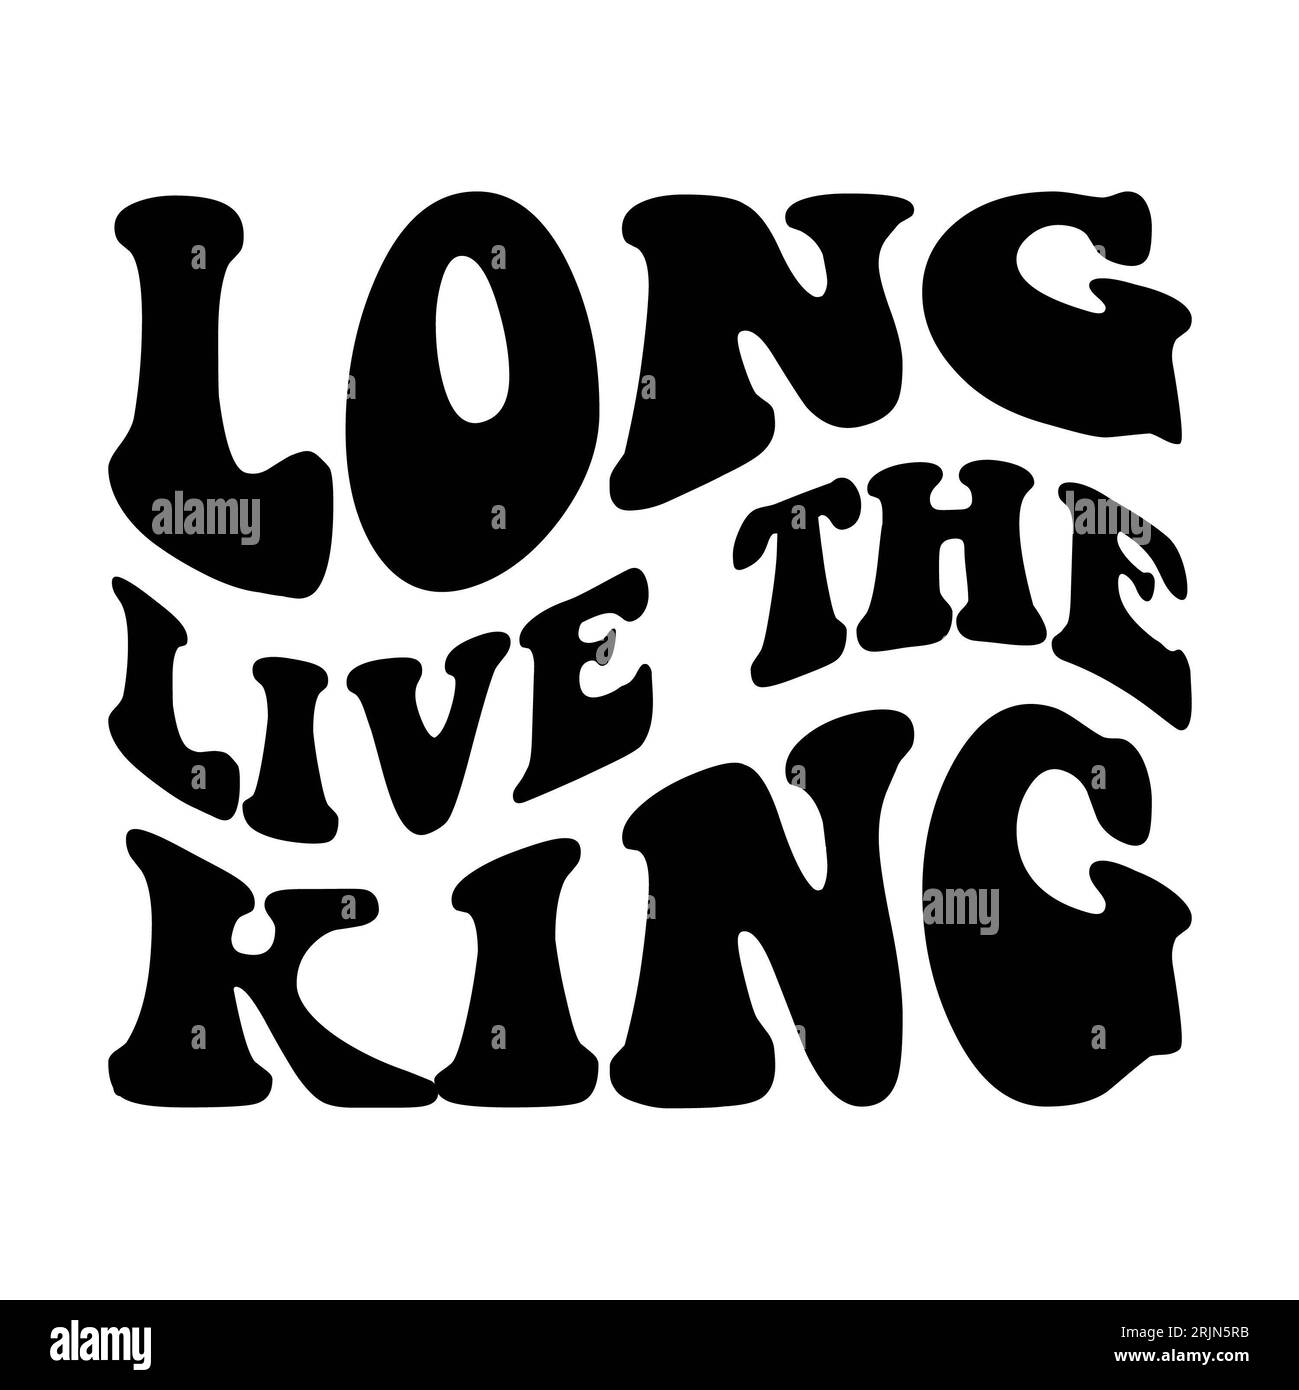 Long live the king as wavy stacked on white background. Isolated illustration. Stock Photo